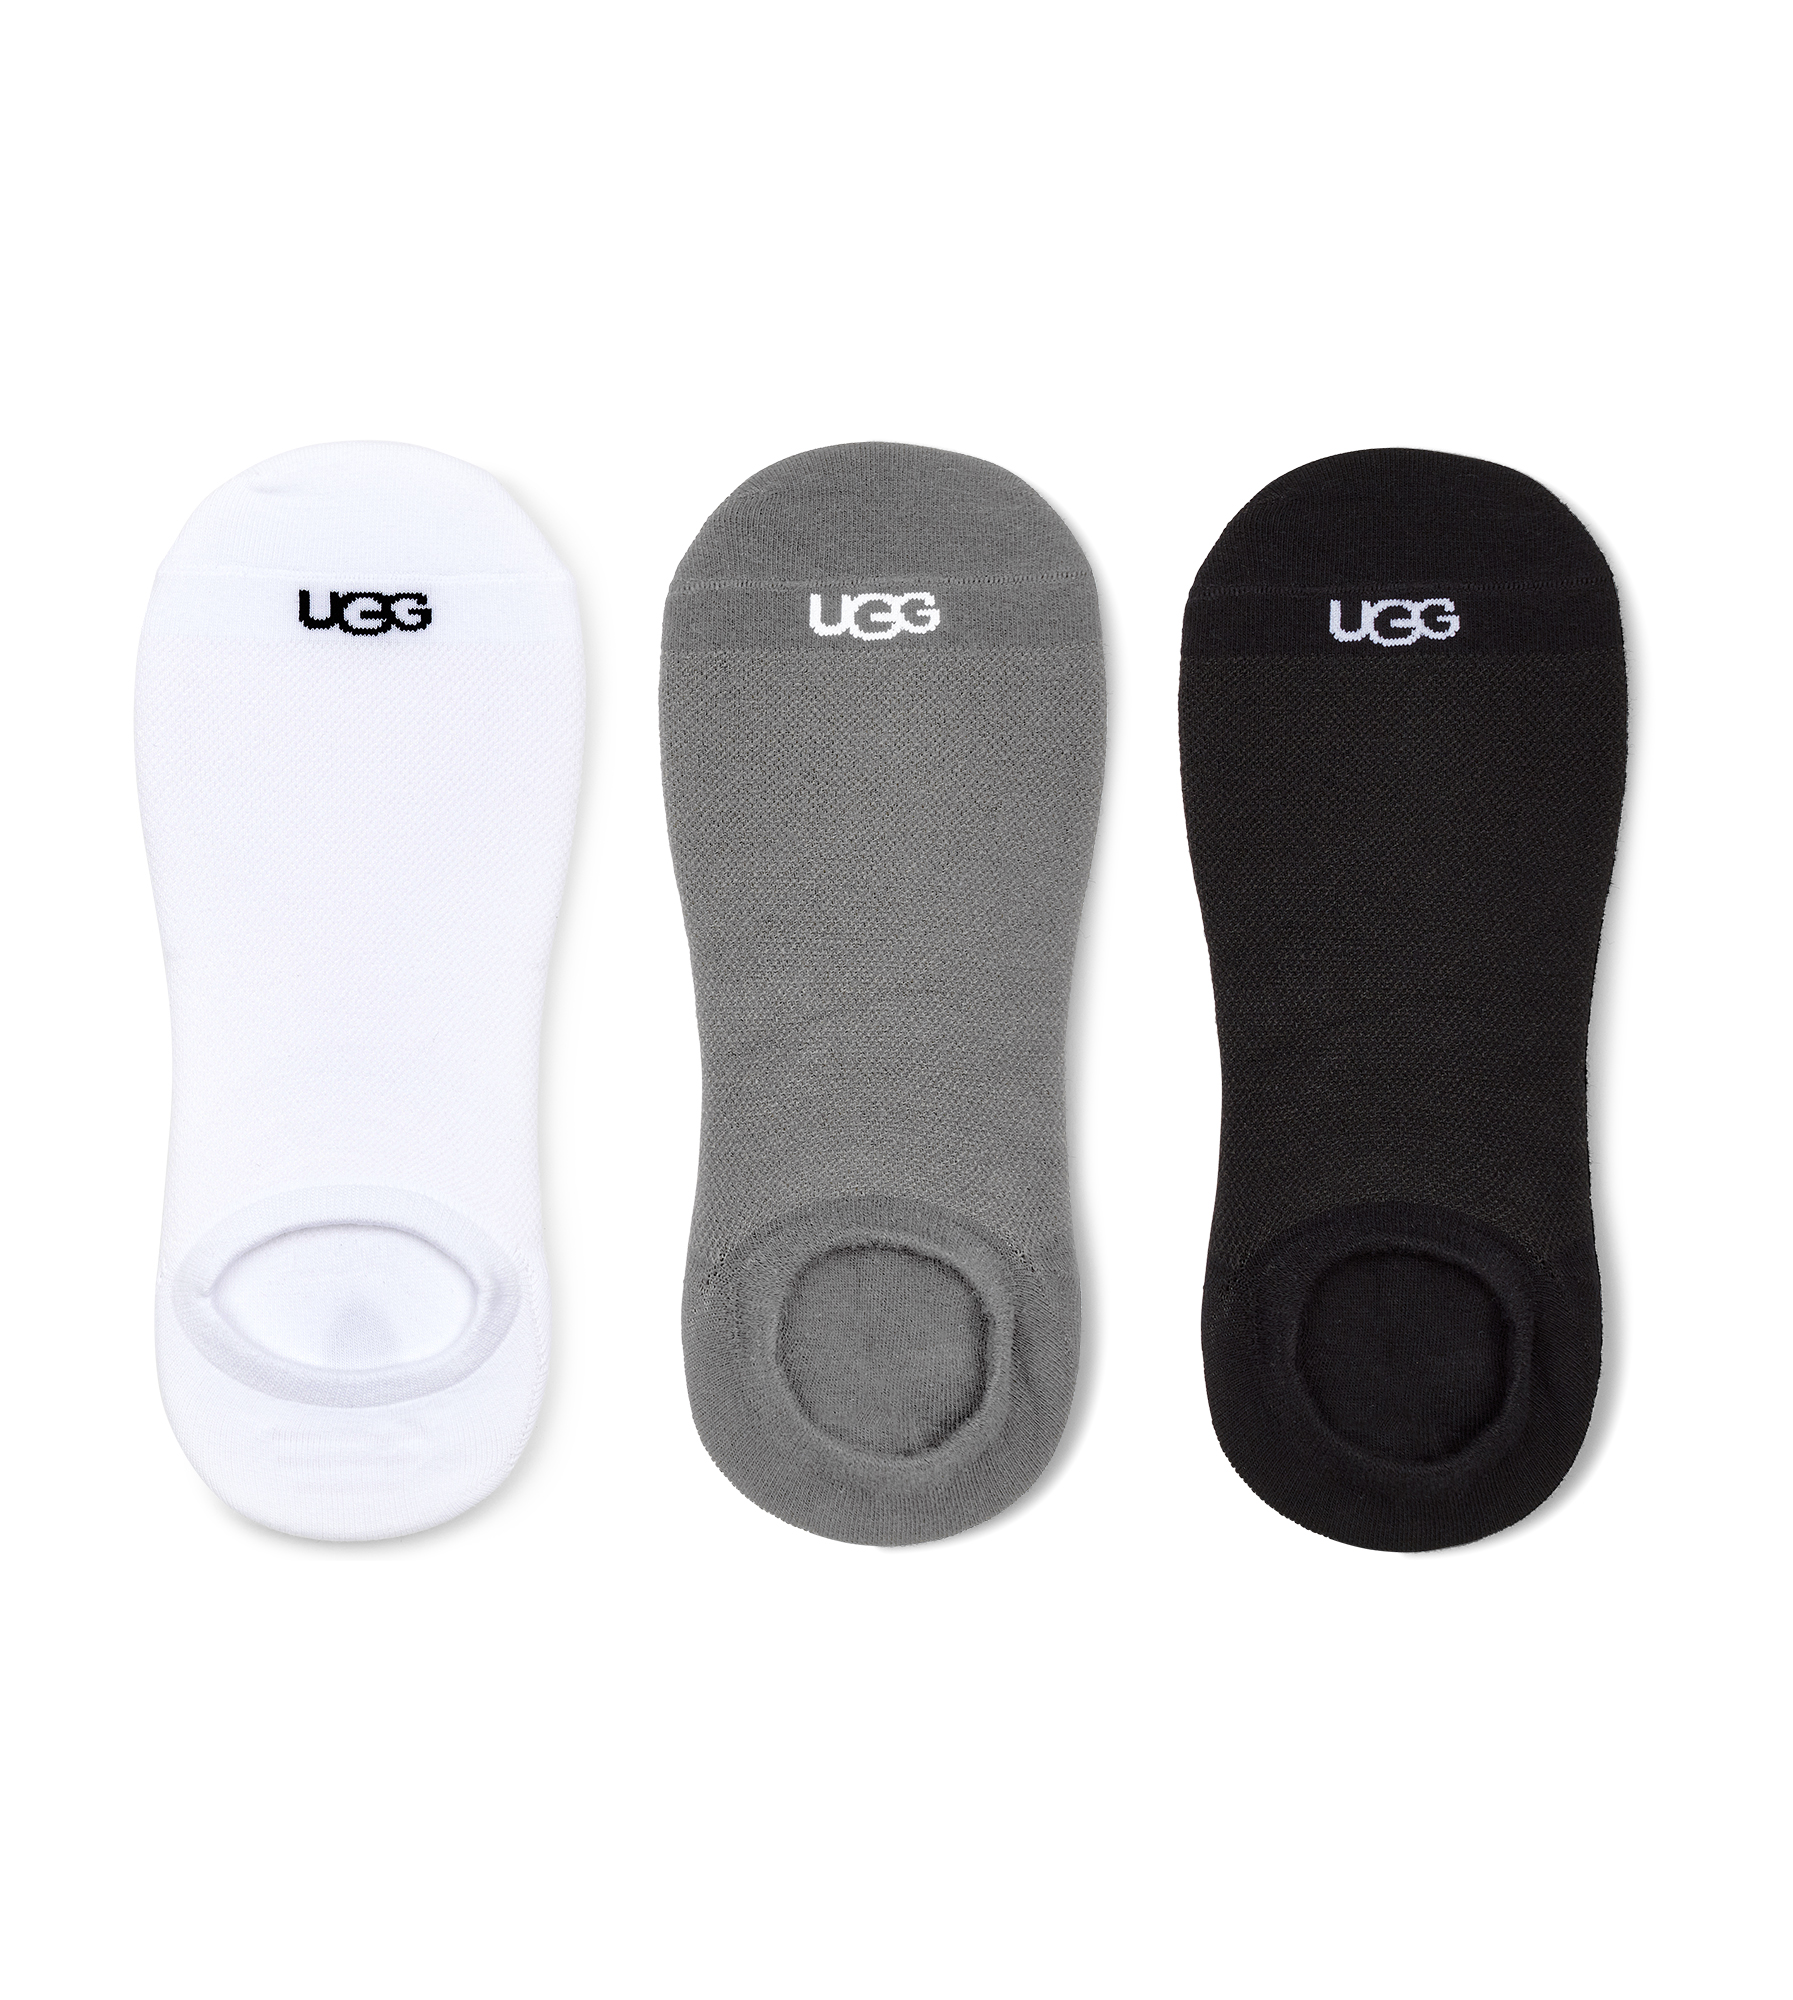 UGG 3 paires de chaussettes invisibles Oliver pour Homme in White/Grey/Black, Taille L/XL product